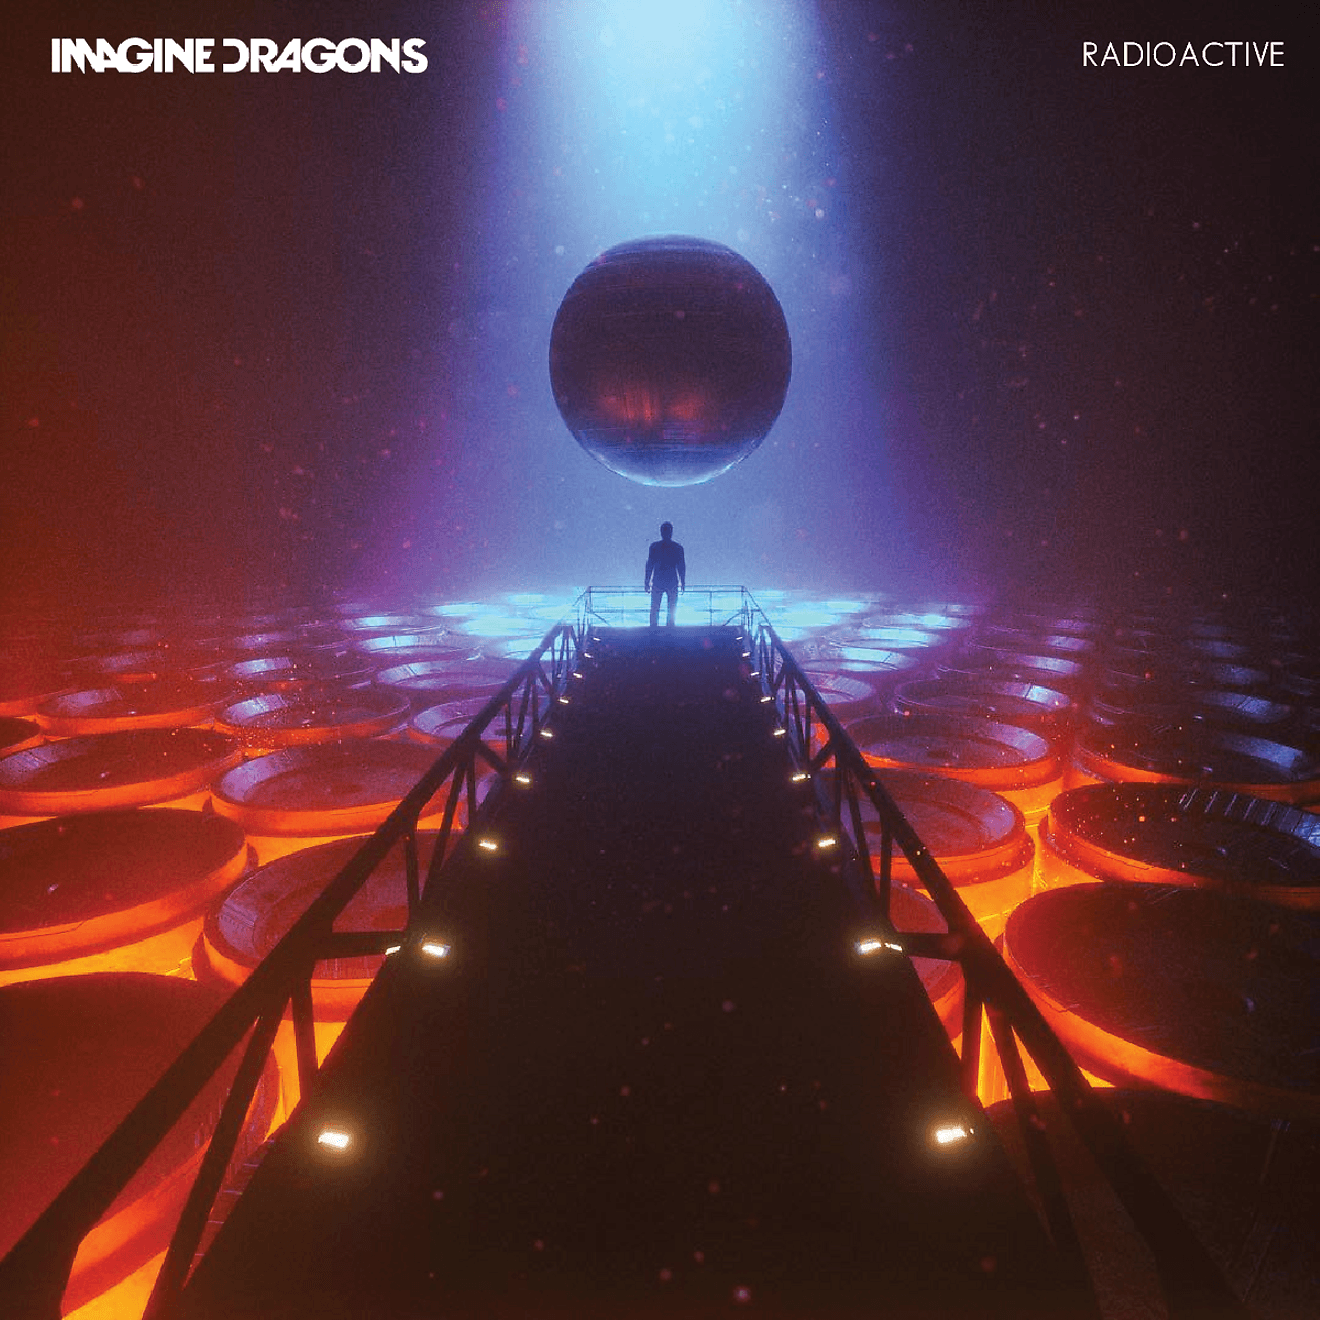 Night Visions Art in Beeple Style